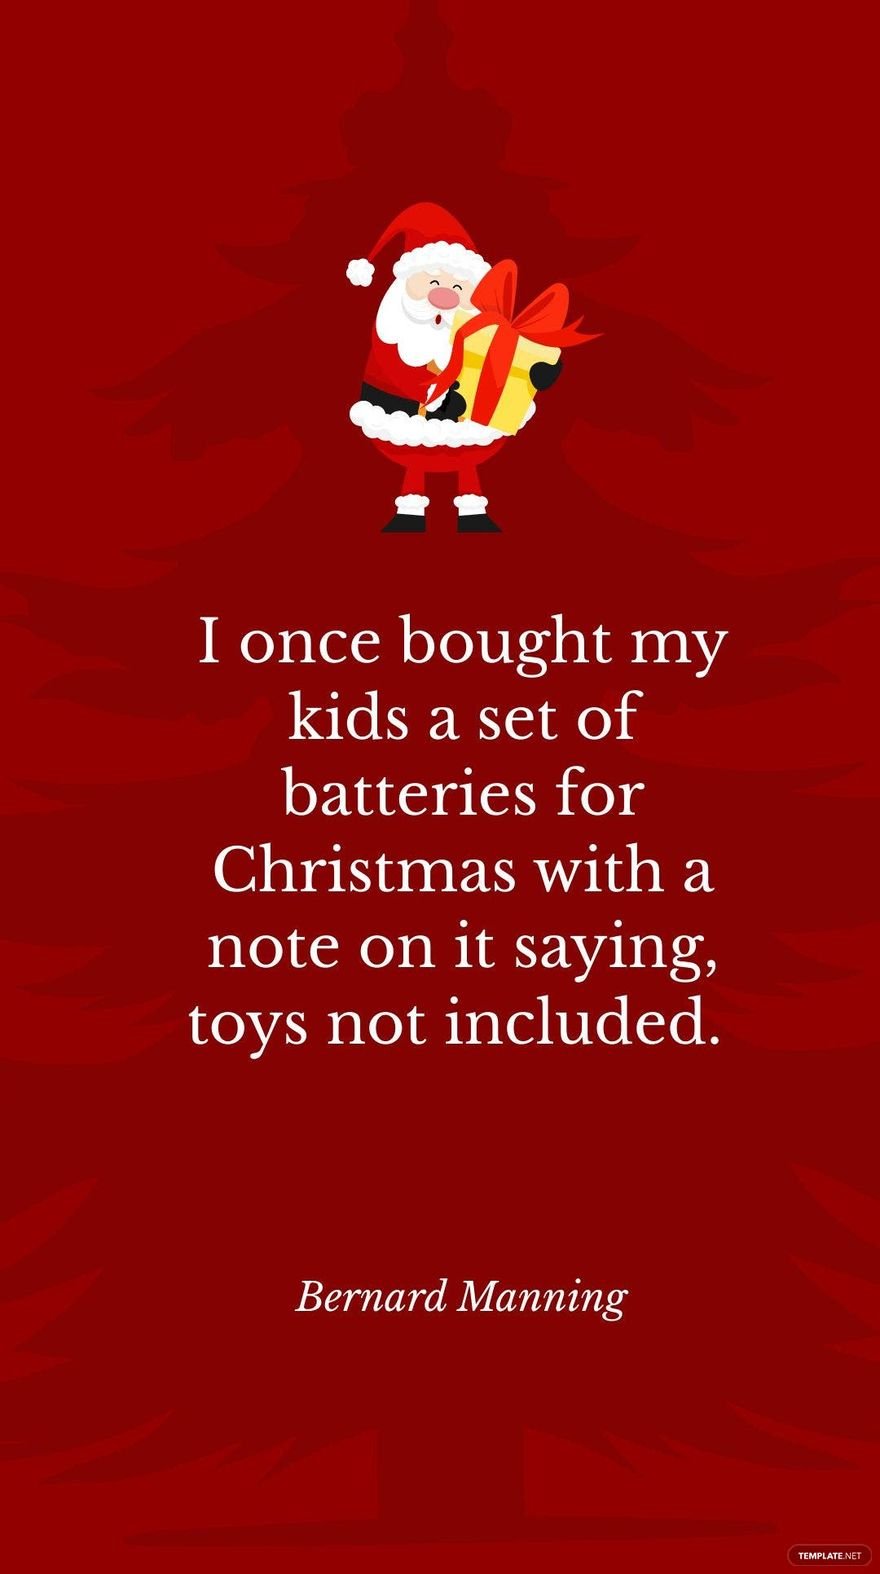 Bernard Manning - I once bought my kids a set of batteries for Christmas with a note on it saying, toys not included. in JPG